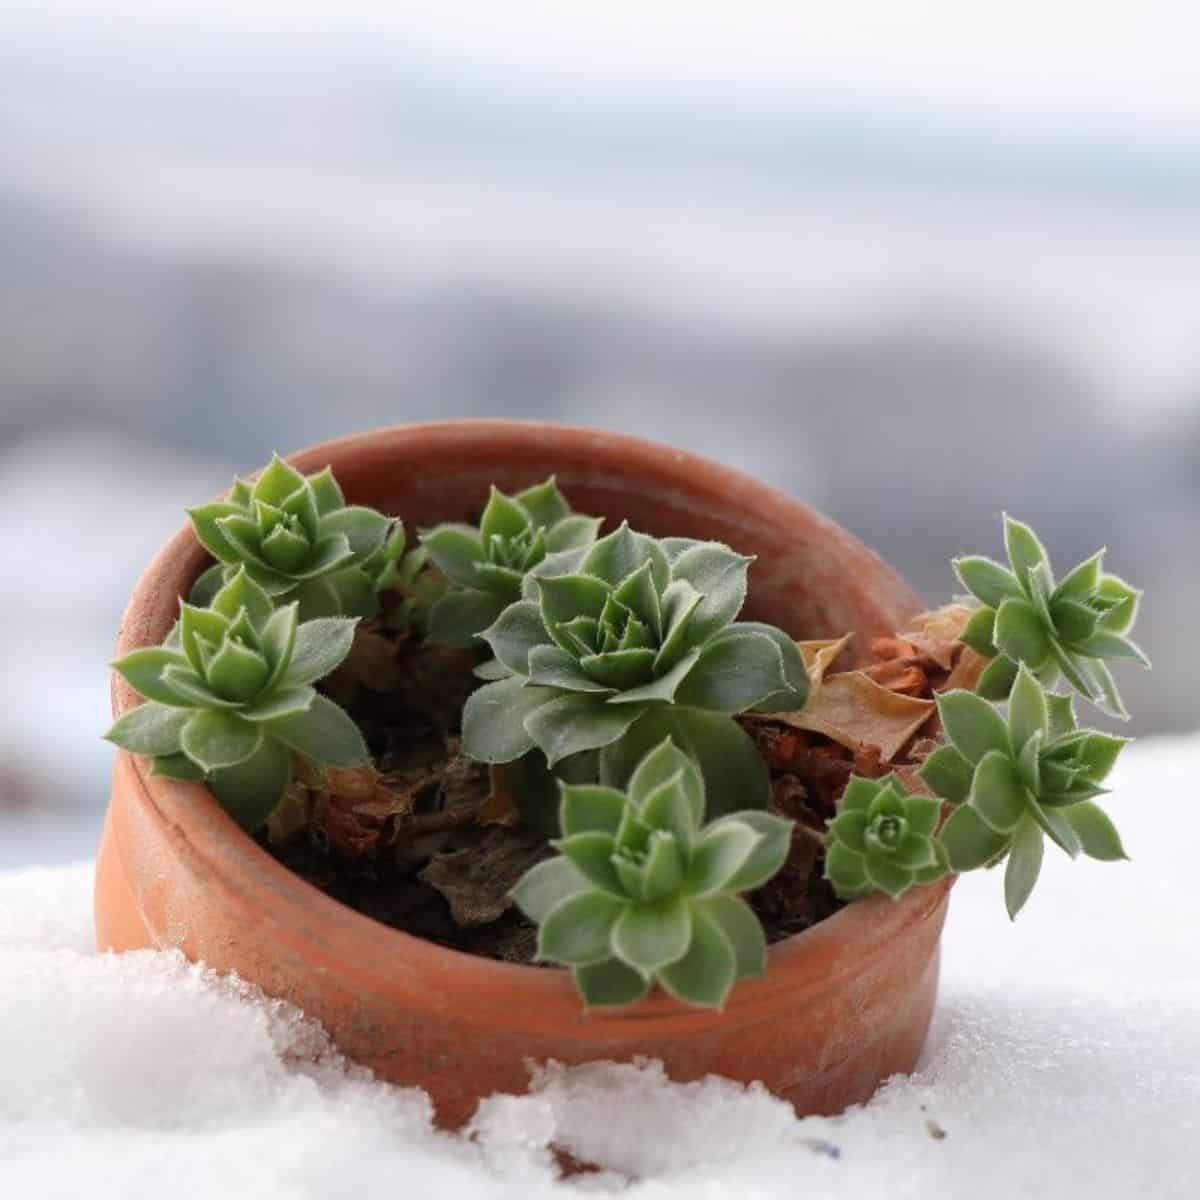 Succulent in a pot during winter.